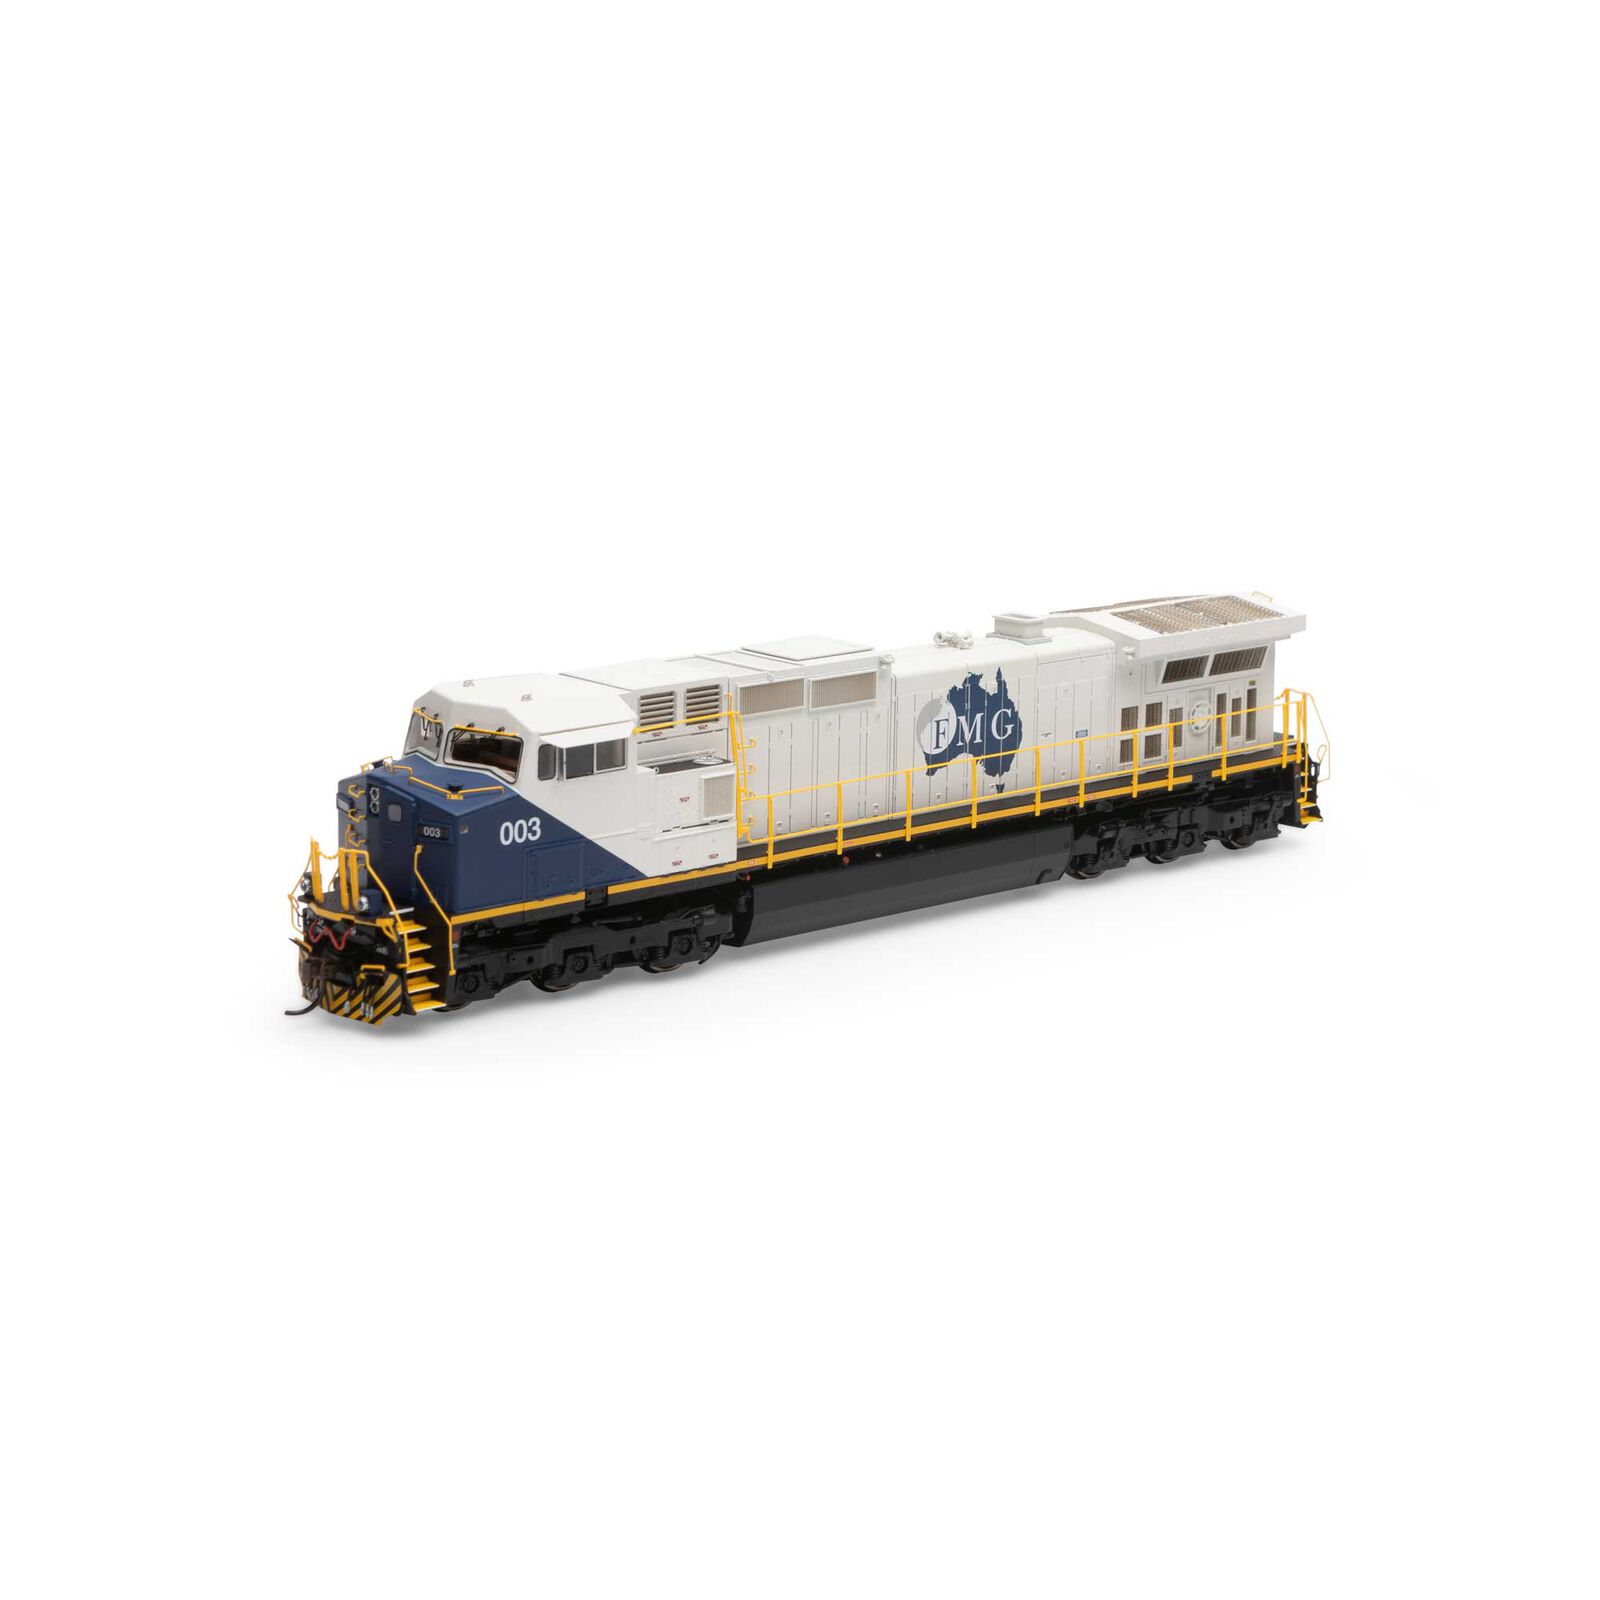 HO G2 Dash 9-44CW with DCC & Sound, FMG #003